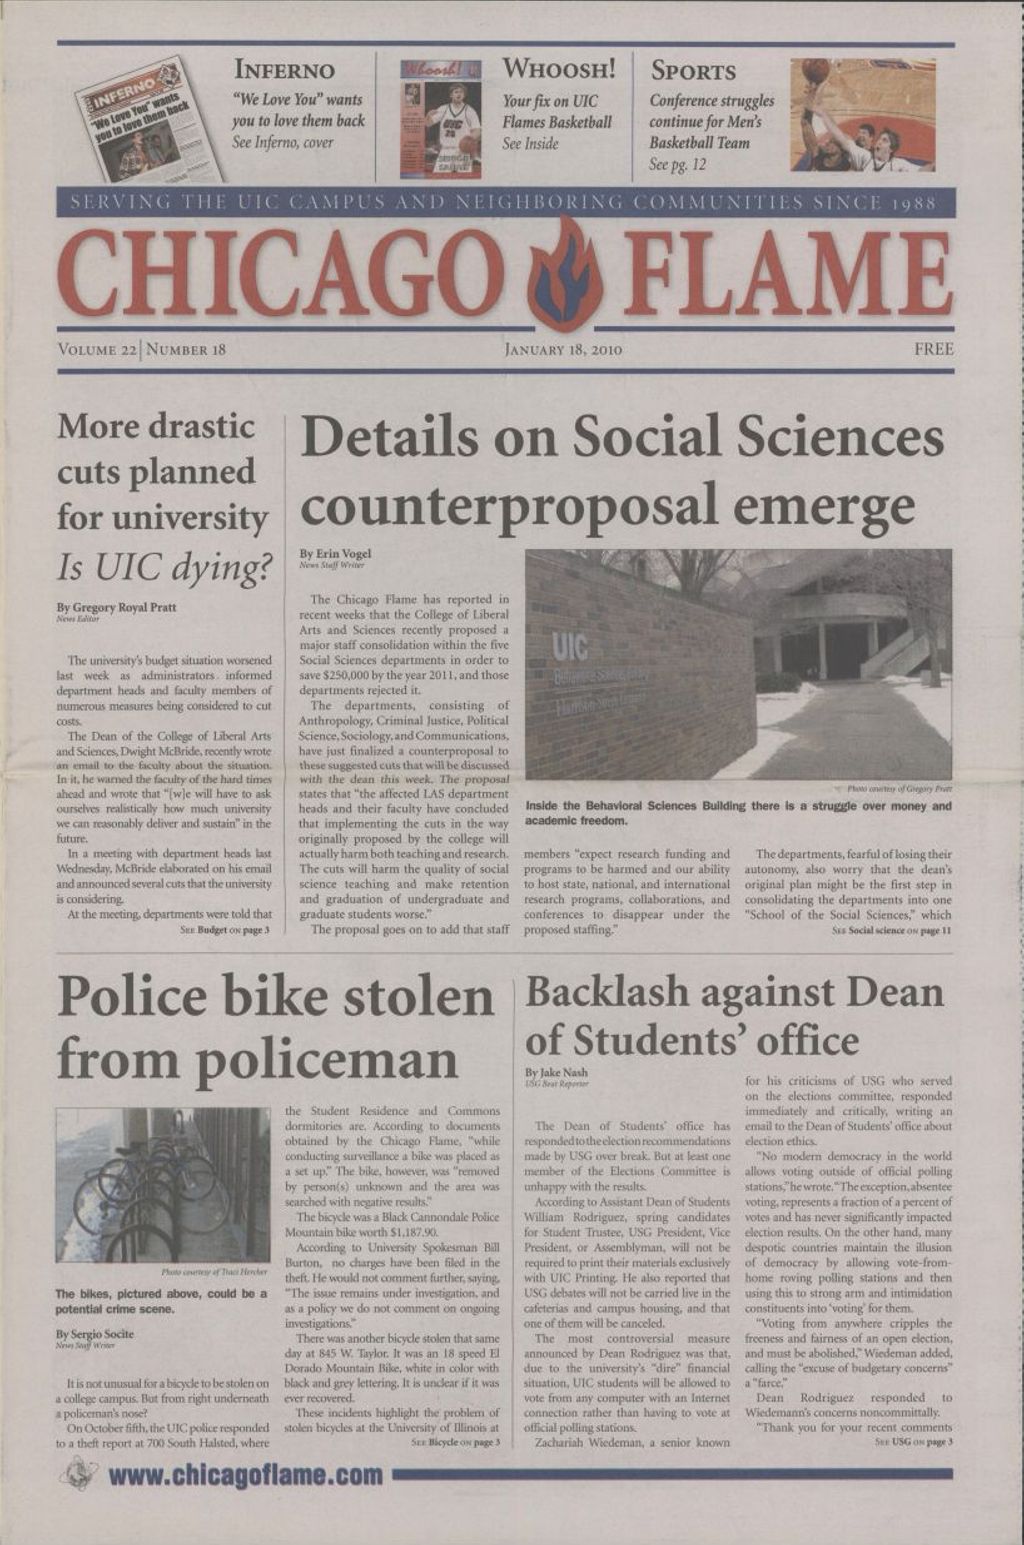 Miniature of Chicago Flame (January 18, 2010)